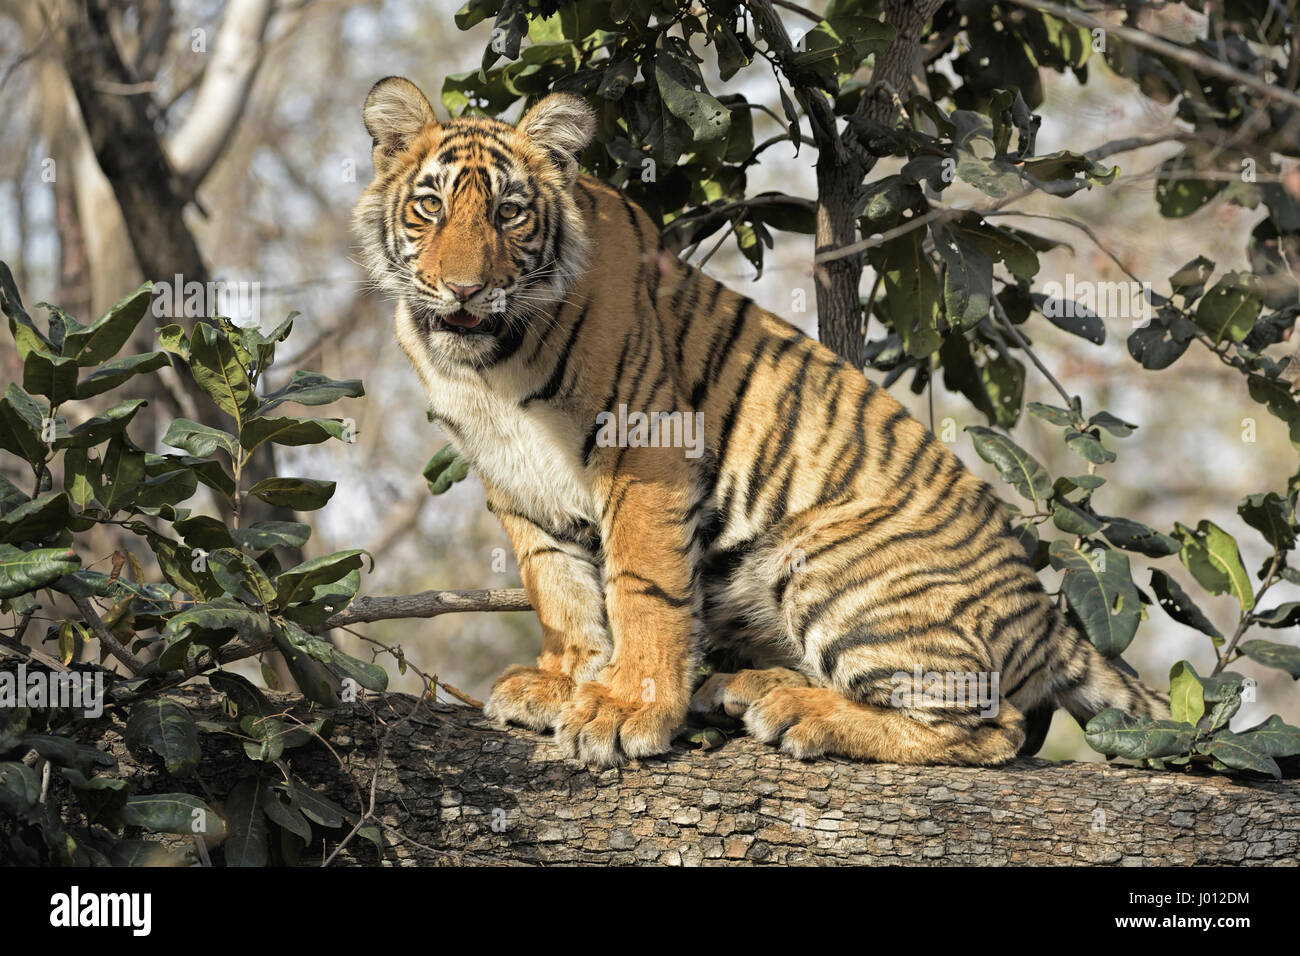 A wild tiger cub sitting on the trunk of a tree in Ranthambhore tiger reserve of India Stock Photo